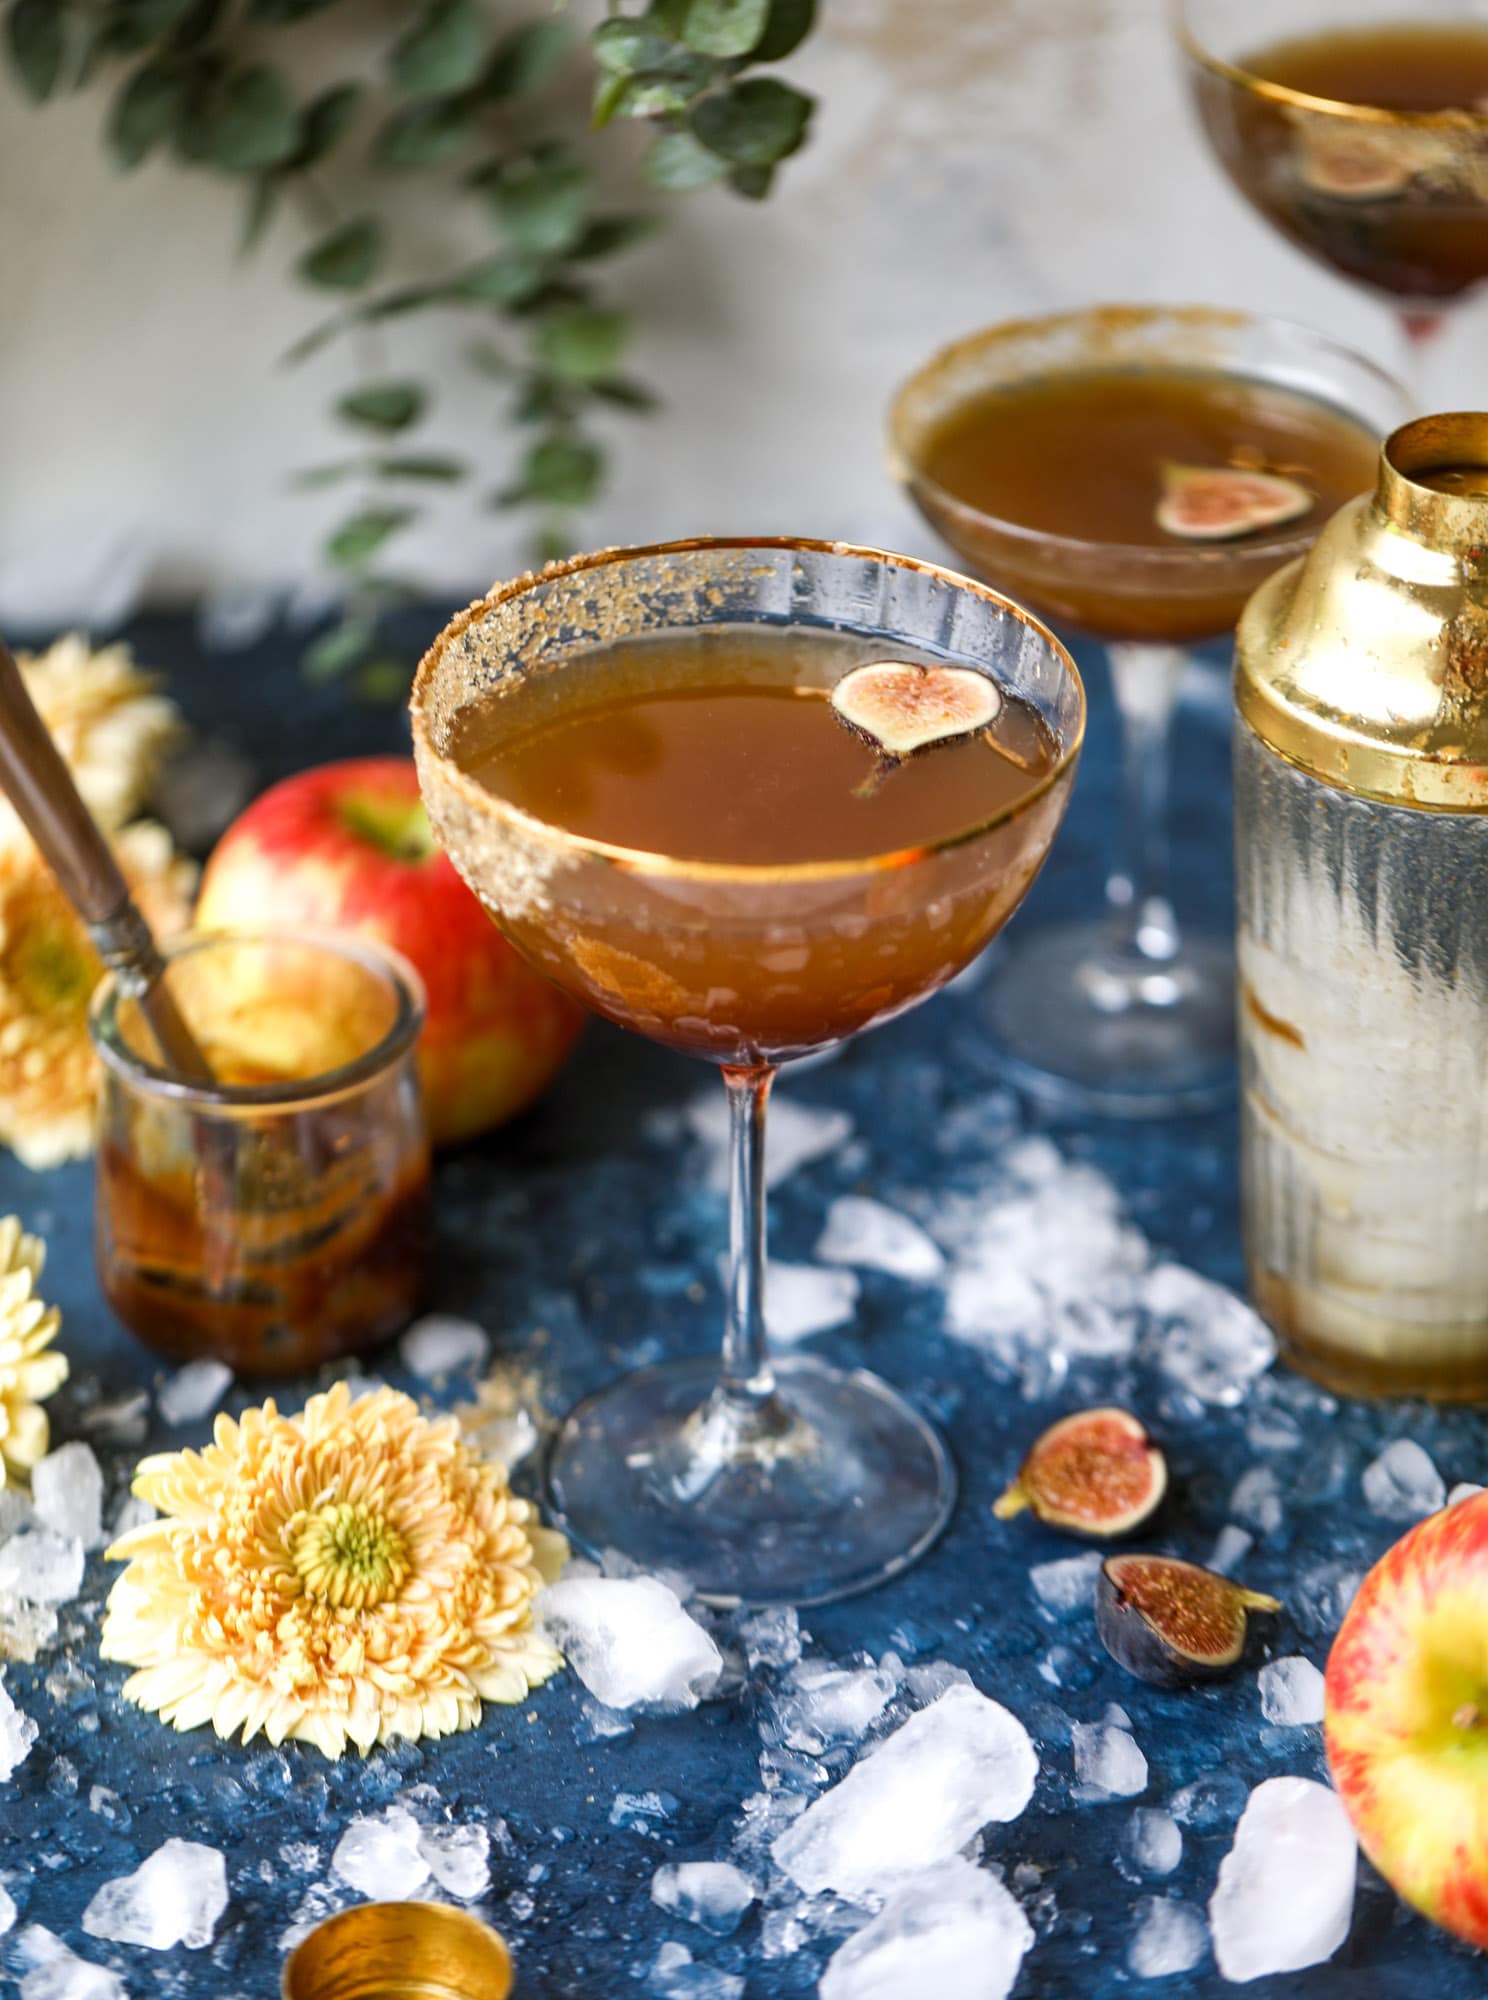 This apple butter cocktail is perfect for the fall season and incredible delicious! It's super simple too: you need apple butter, bourbon and ginger ale or ginger beer. A cinnamon sugar rim and a fig garnish make it super pretty. YUM. I howsweeteats.com #apple #butter #cocktail #bourbon #fizz